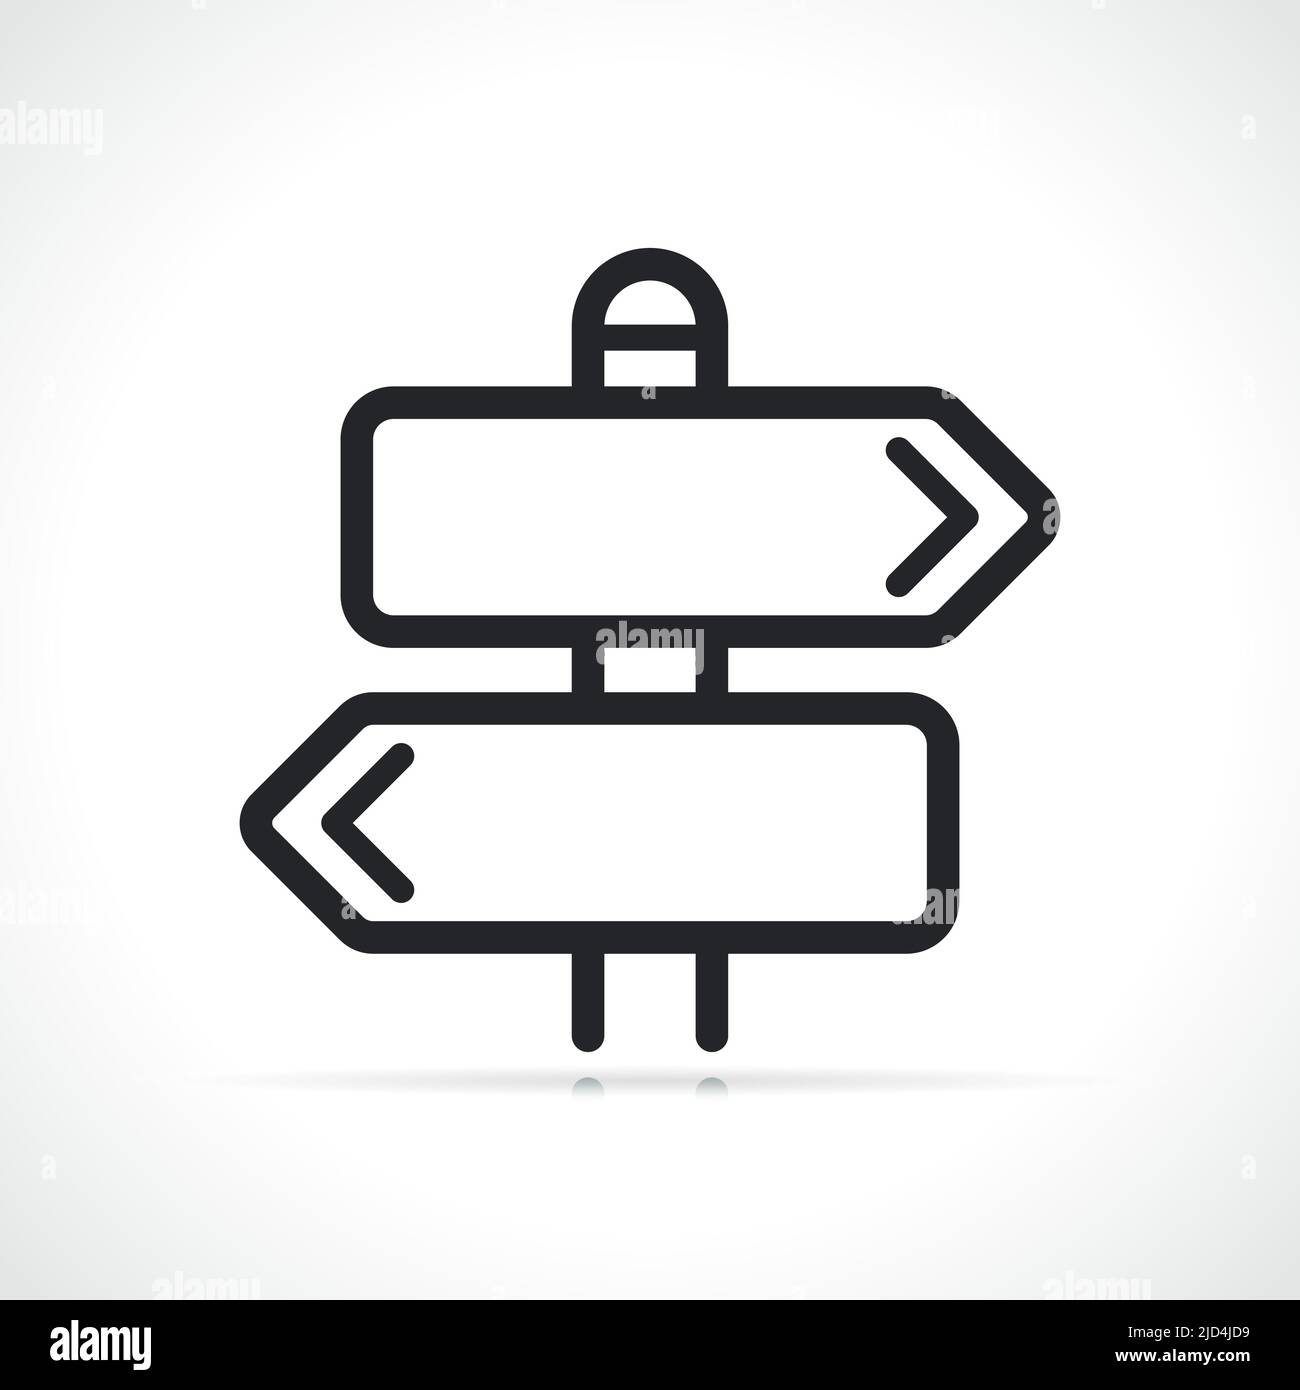 direction signpost or roadsign line icon isolated Stock Vector